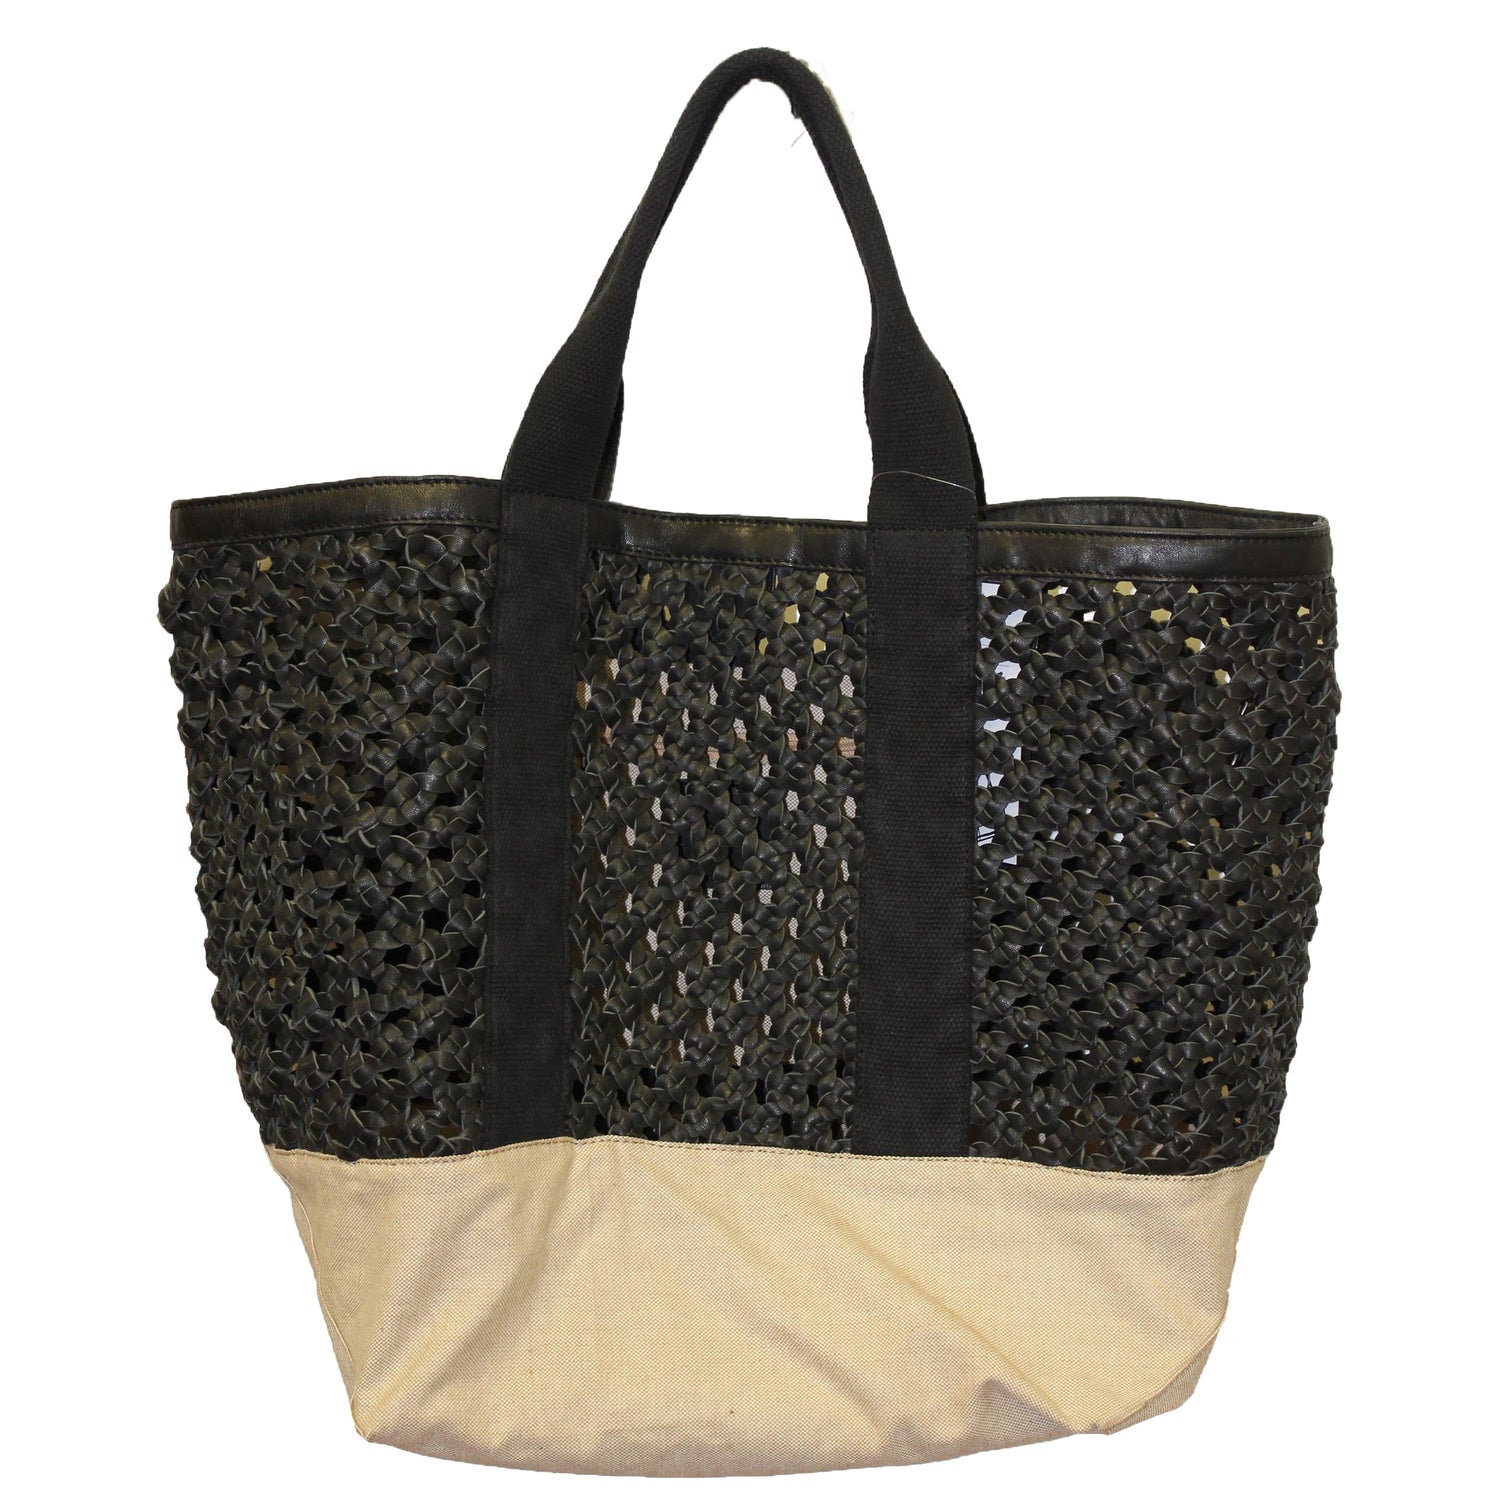 Black Woven Leather & Canvas Tote